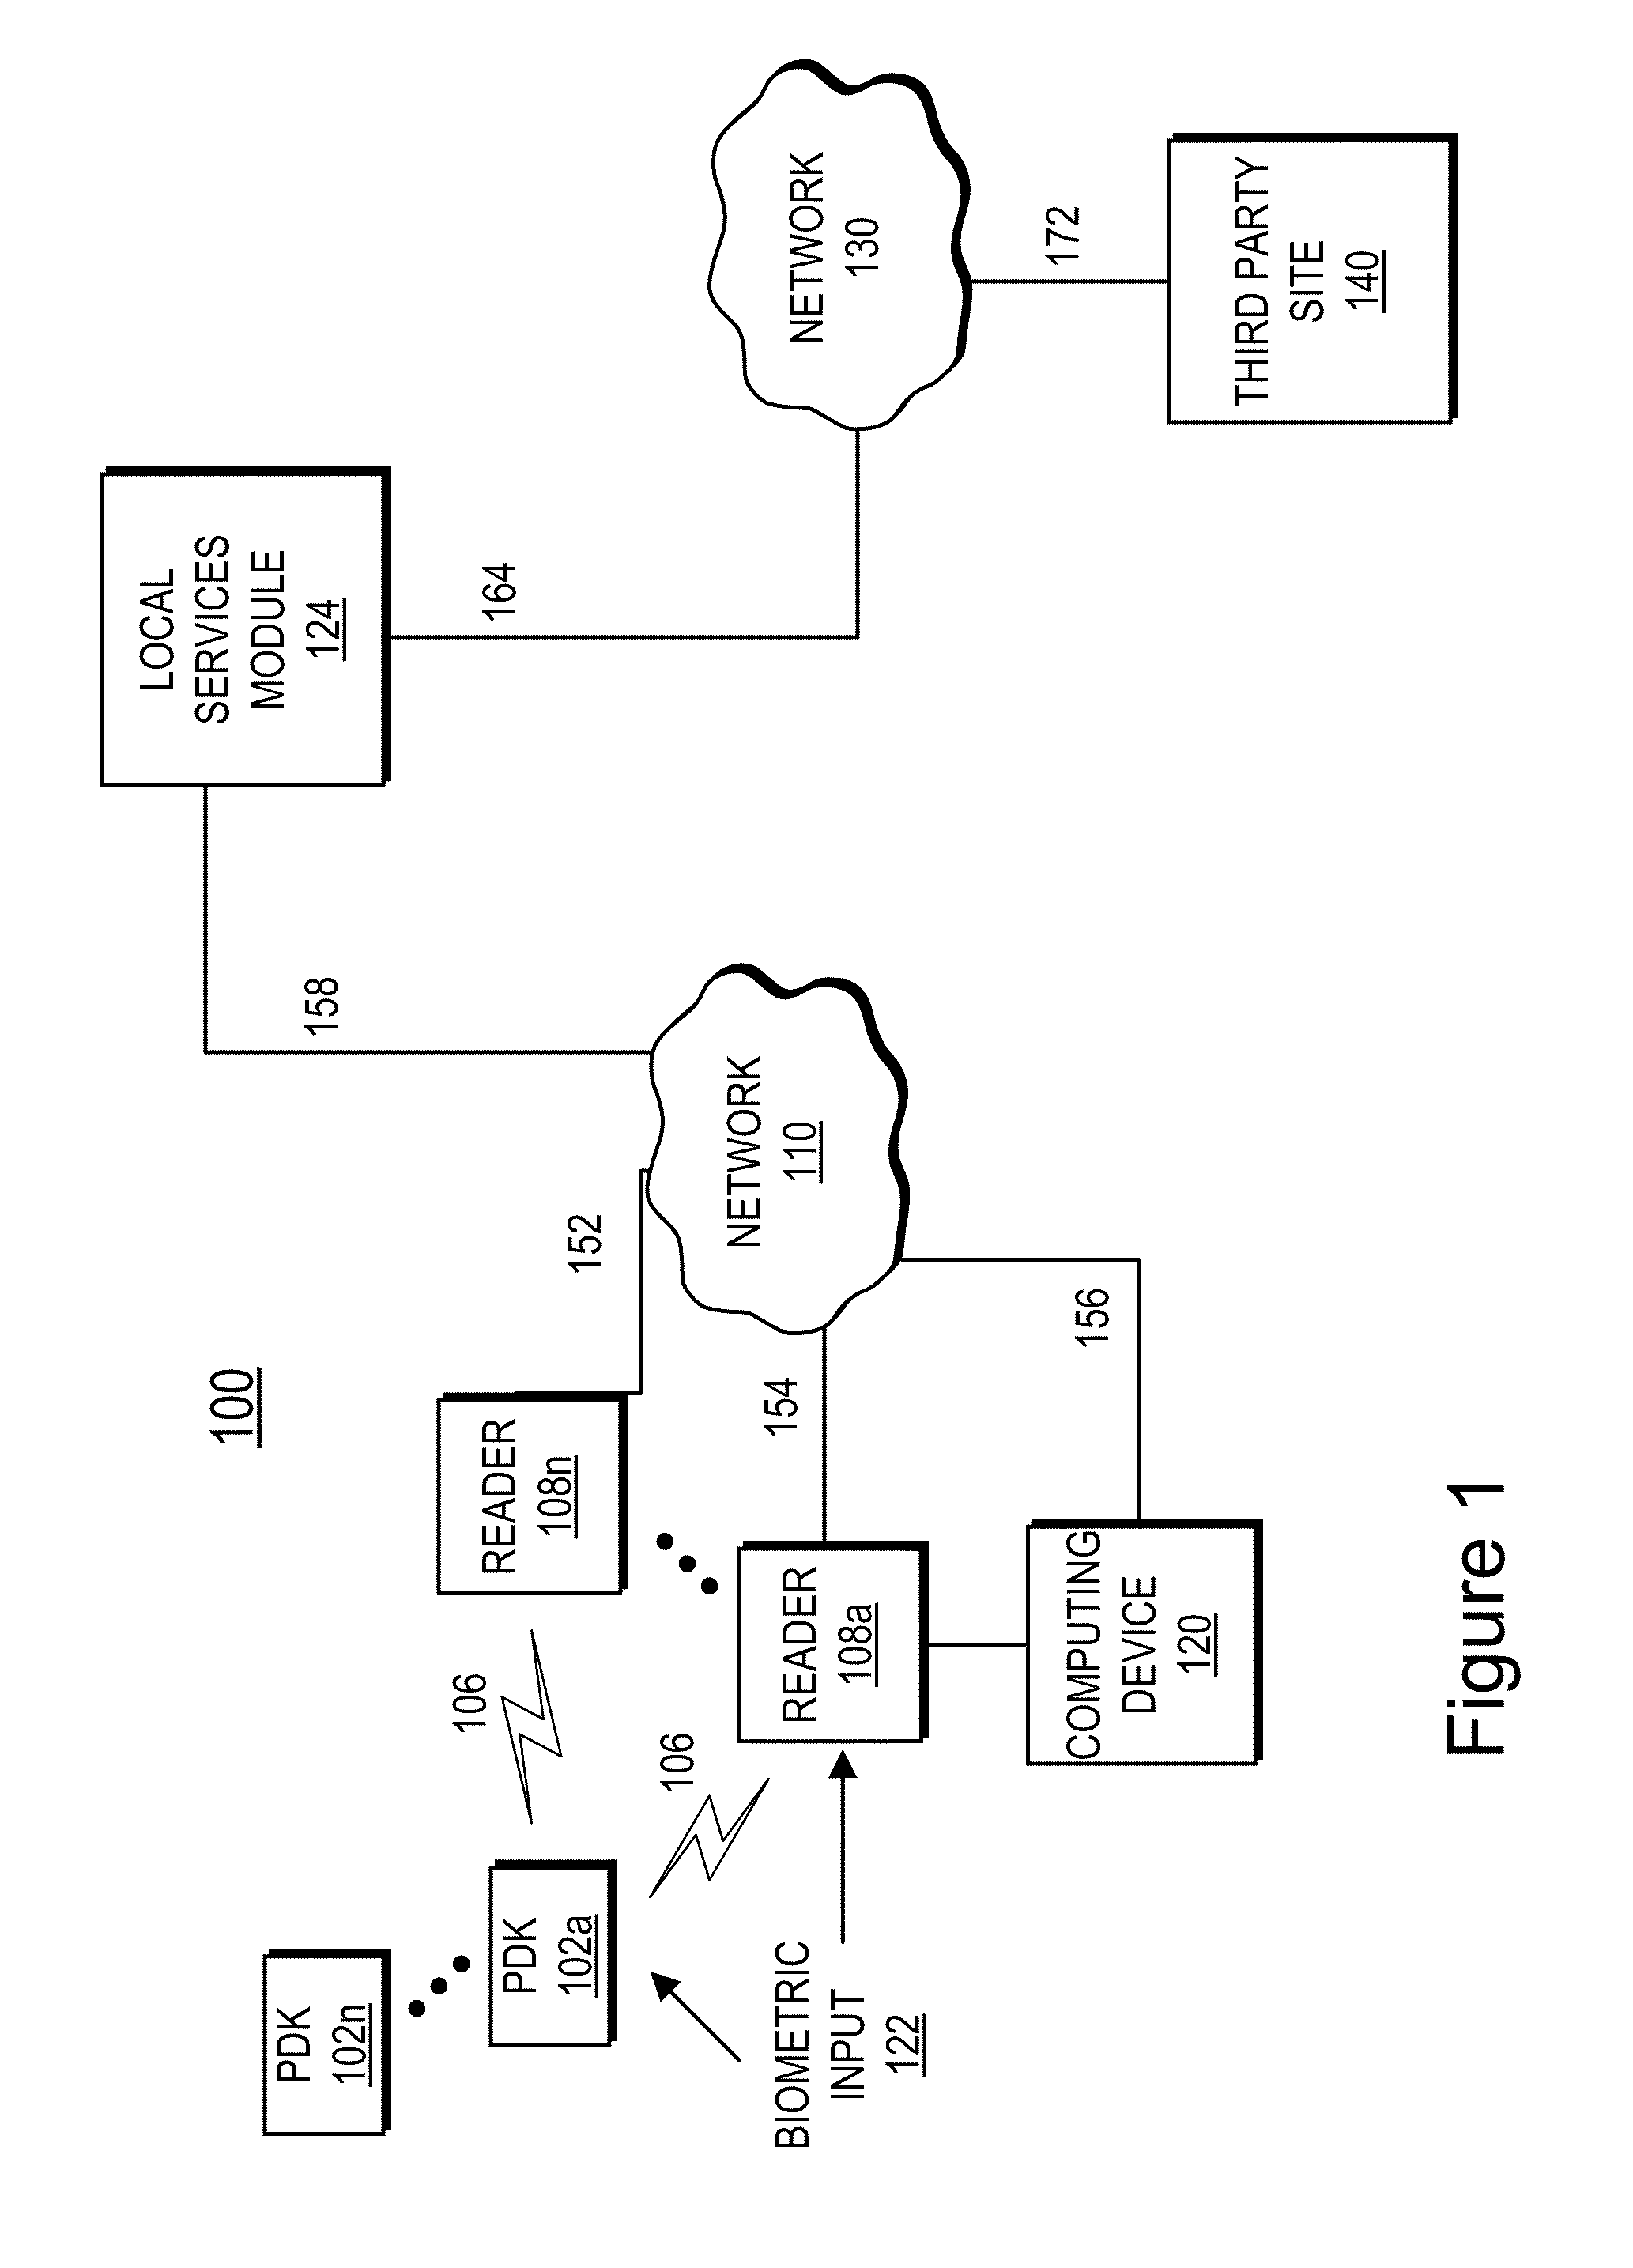 Proximity-based system for automatic application or data access and item tracking